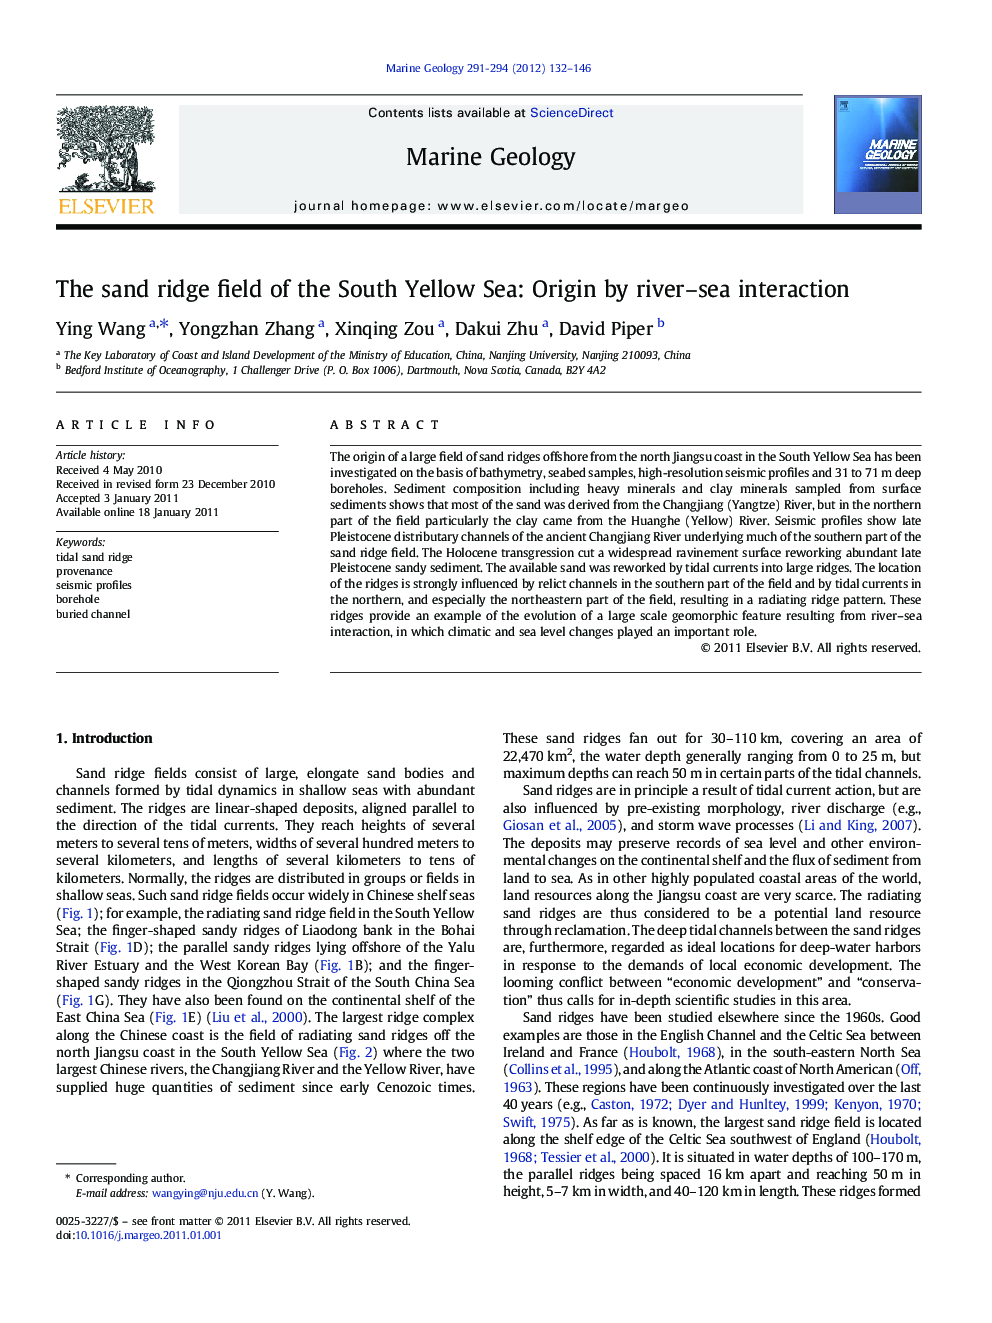 The sand ridge field of the South Yellow Sea: Origin by river–sea interaction